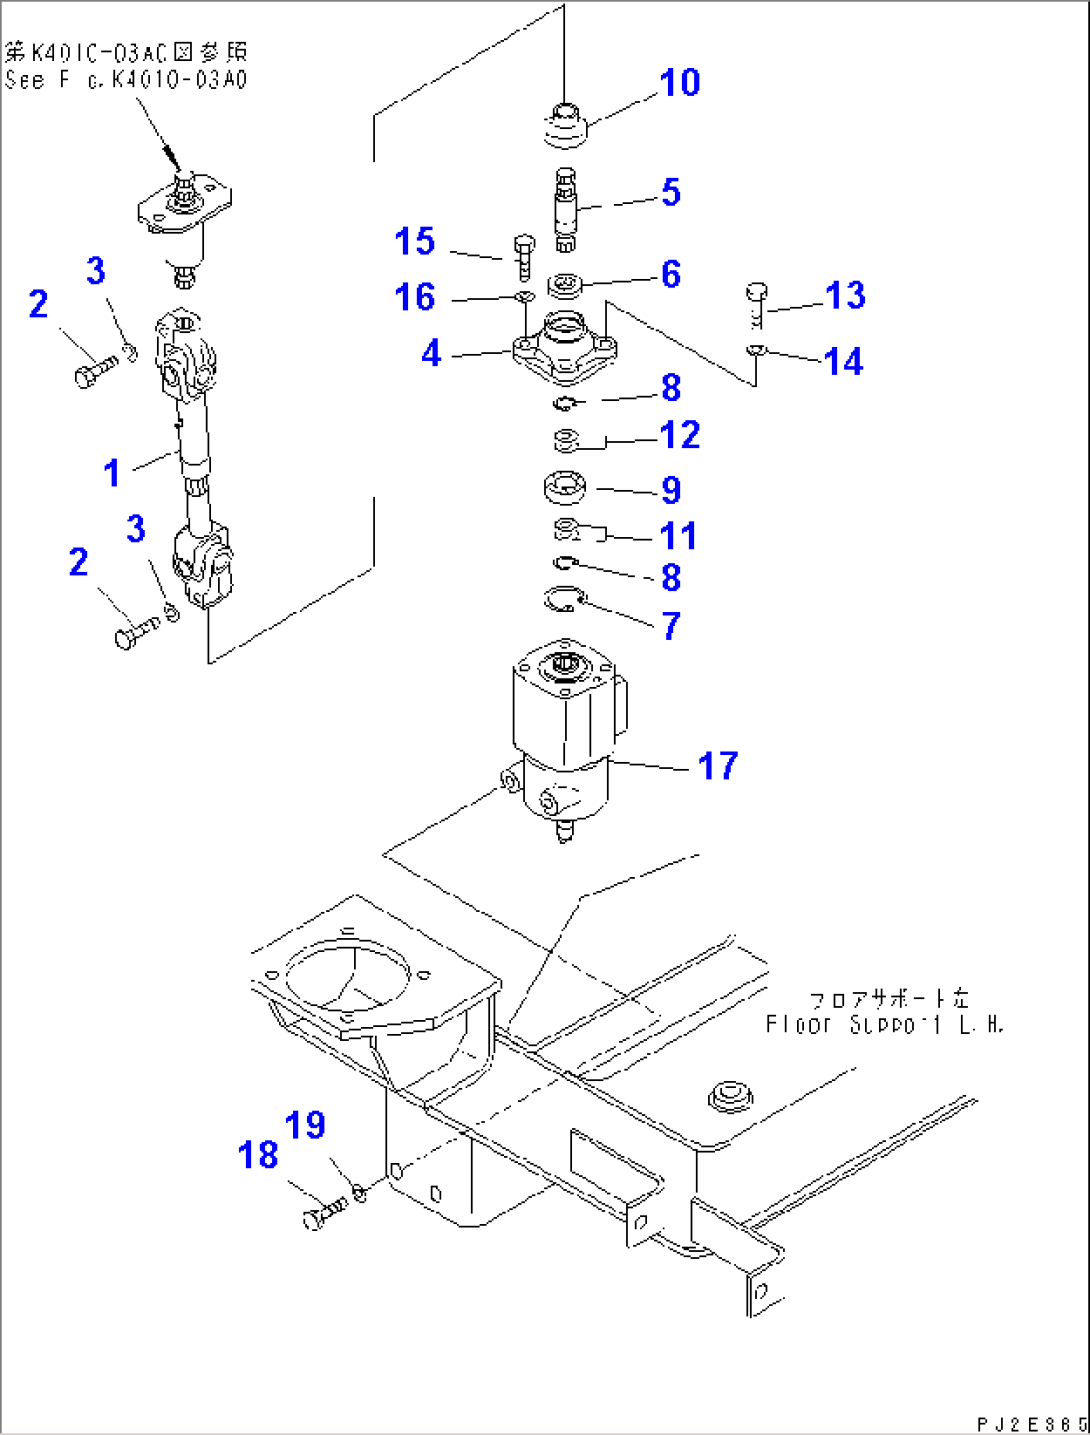 STEERING AND TRANSMISSION CONTROL (COLUMN AND STEERING VALVE) (WITH ADVANCED JOY STICK STEERING)(#51001-51074)